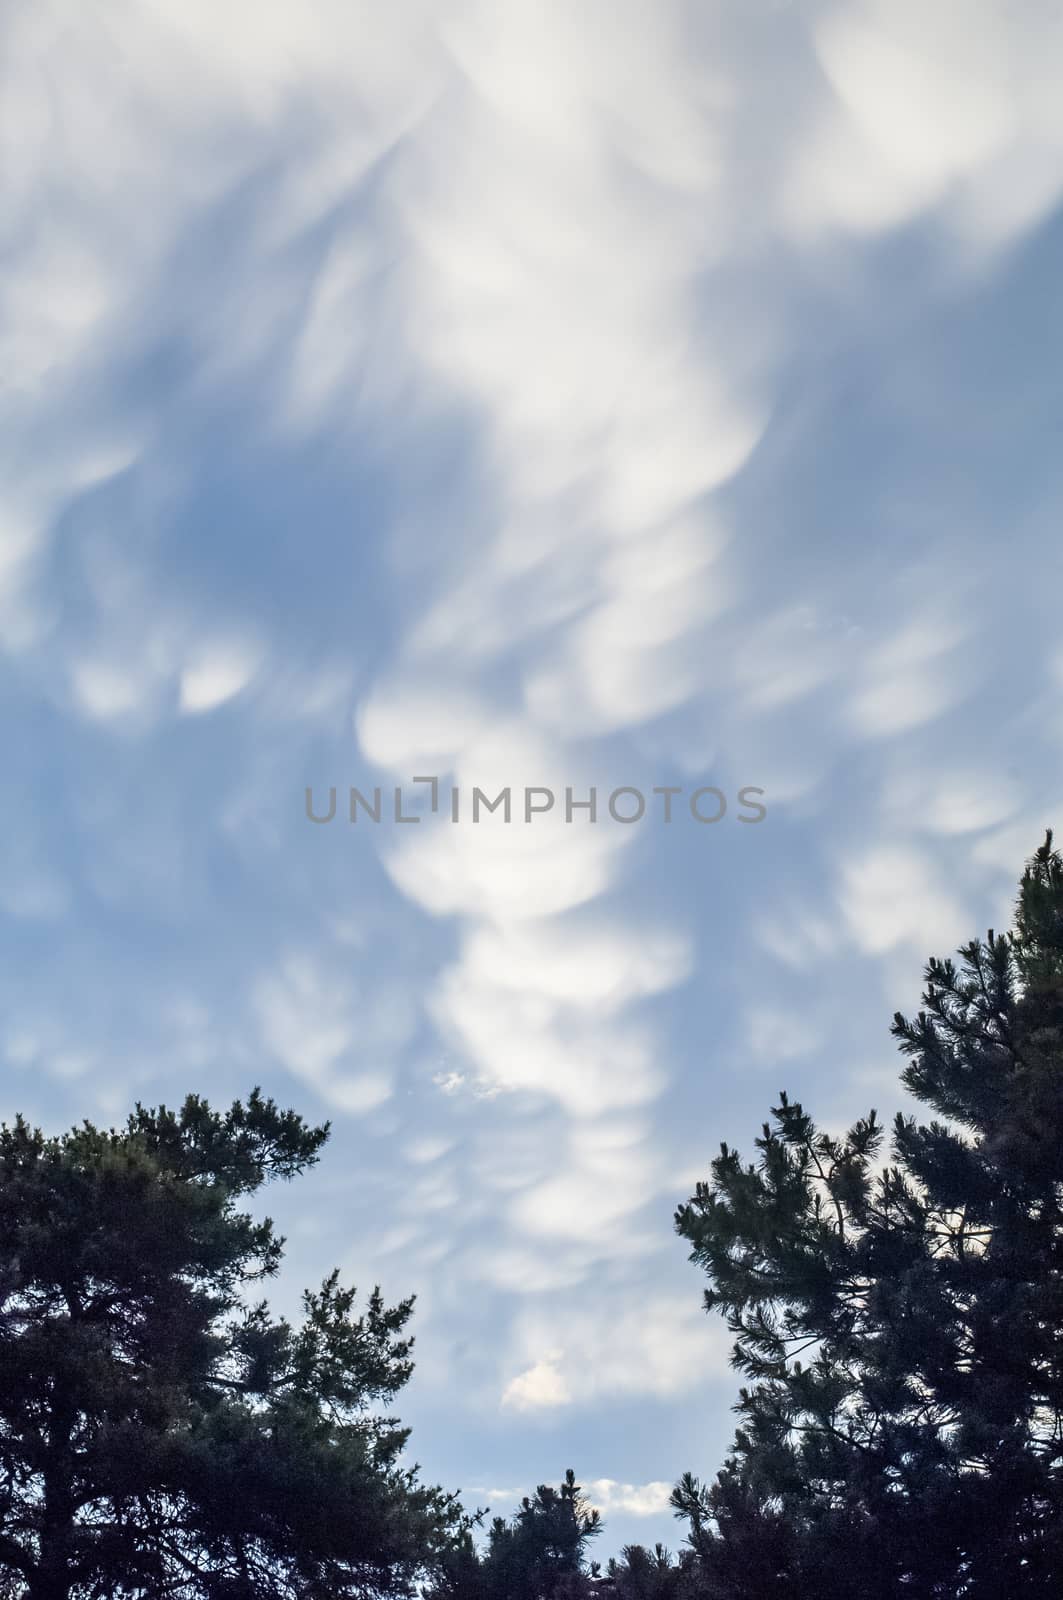 Billowing Clouds above two large Pine trees